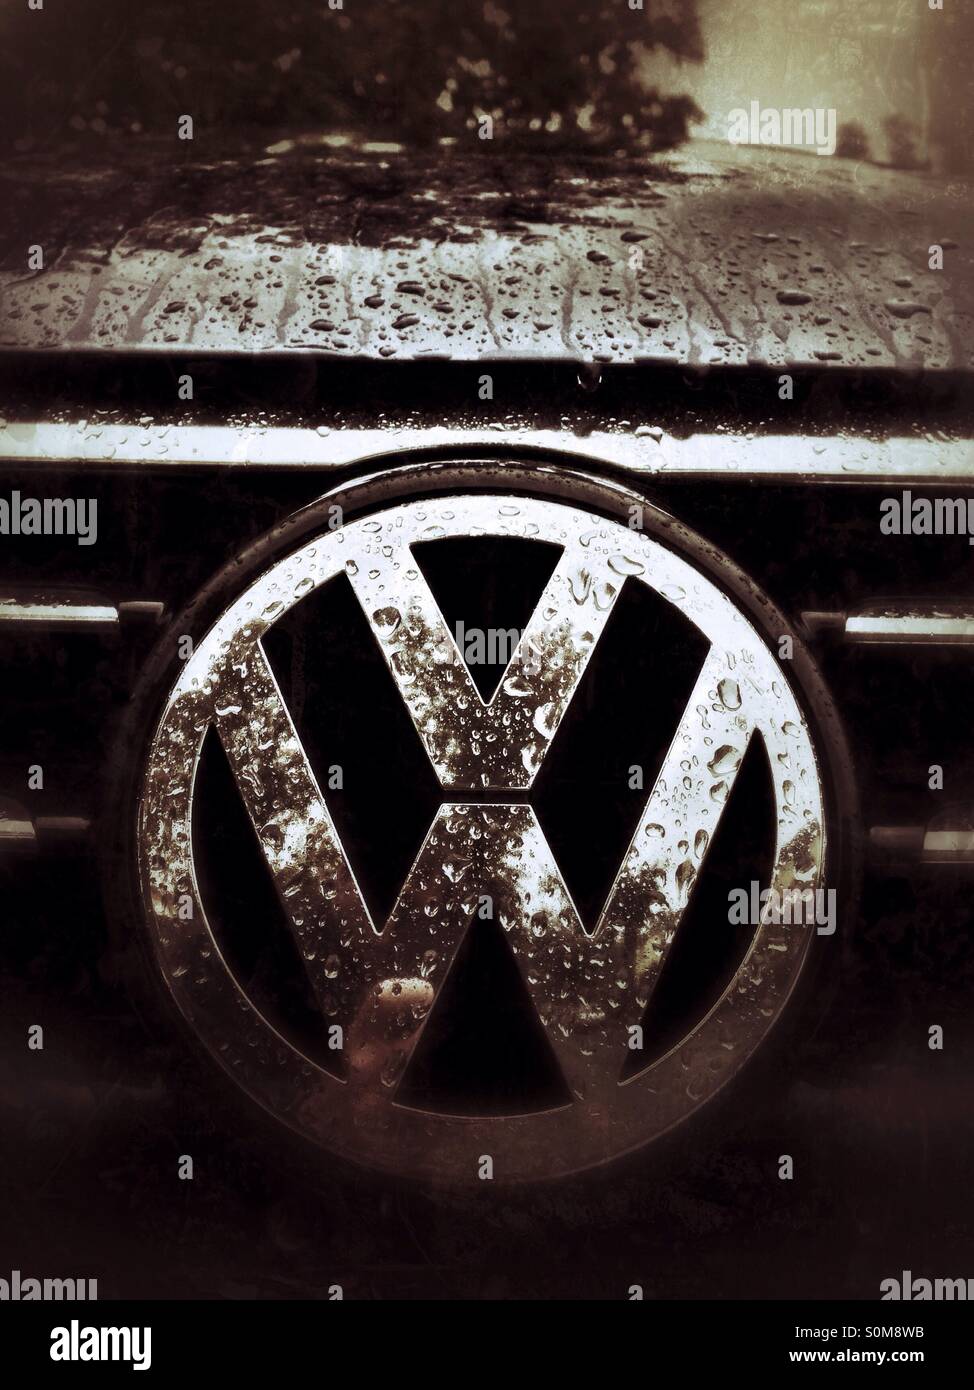 VW logo on the front of the car wet with rain Stock Photo